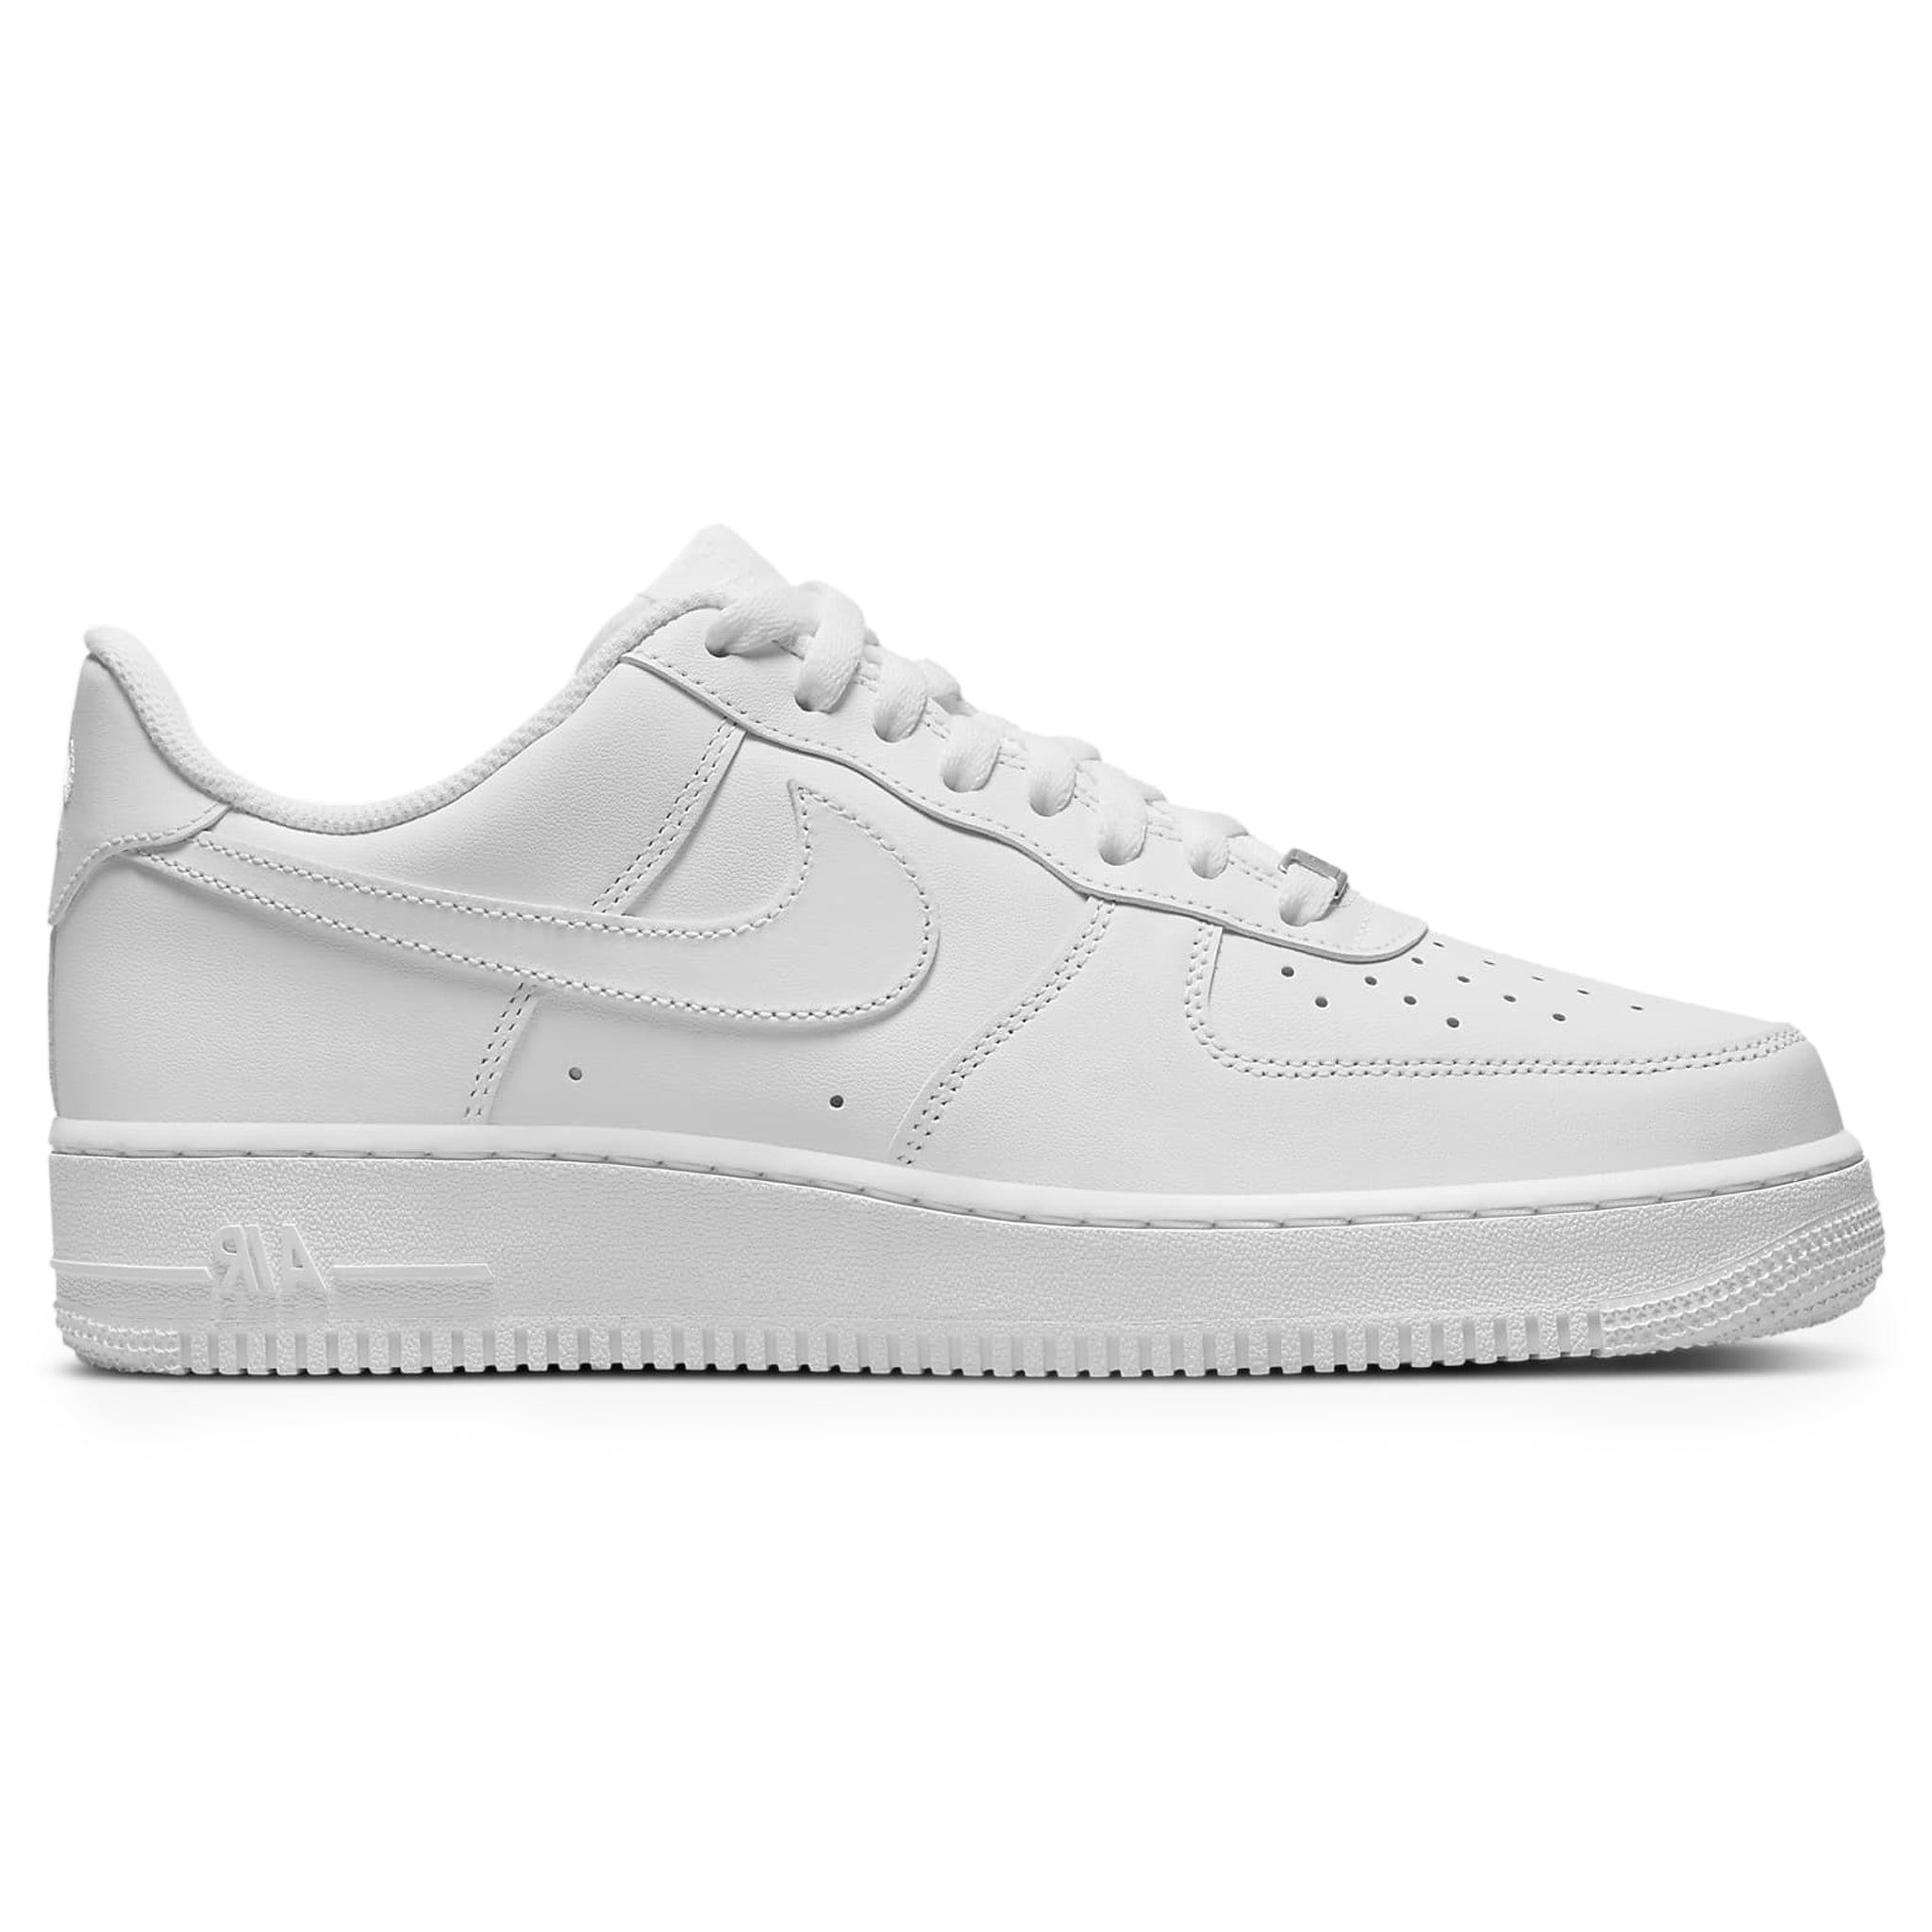 Side view of Nike Air Force 1 Low '07 White 